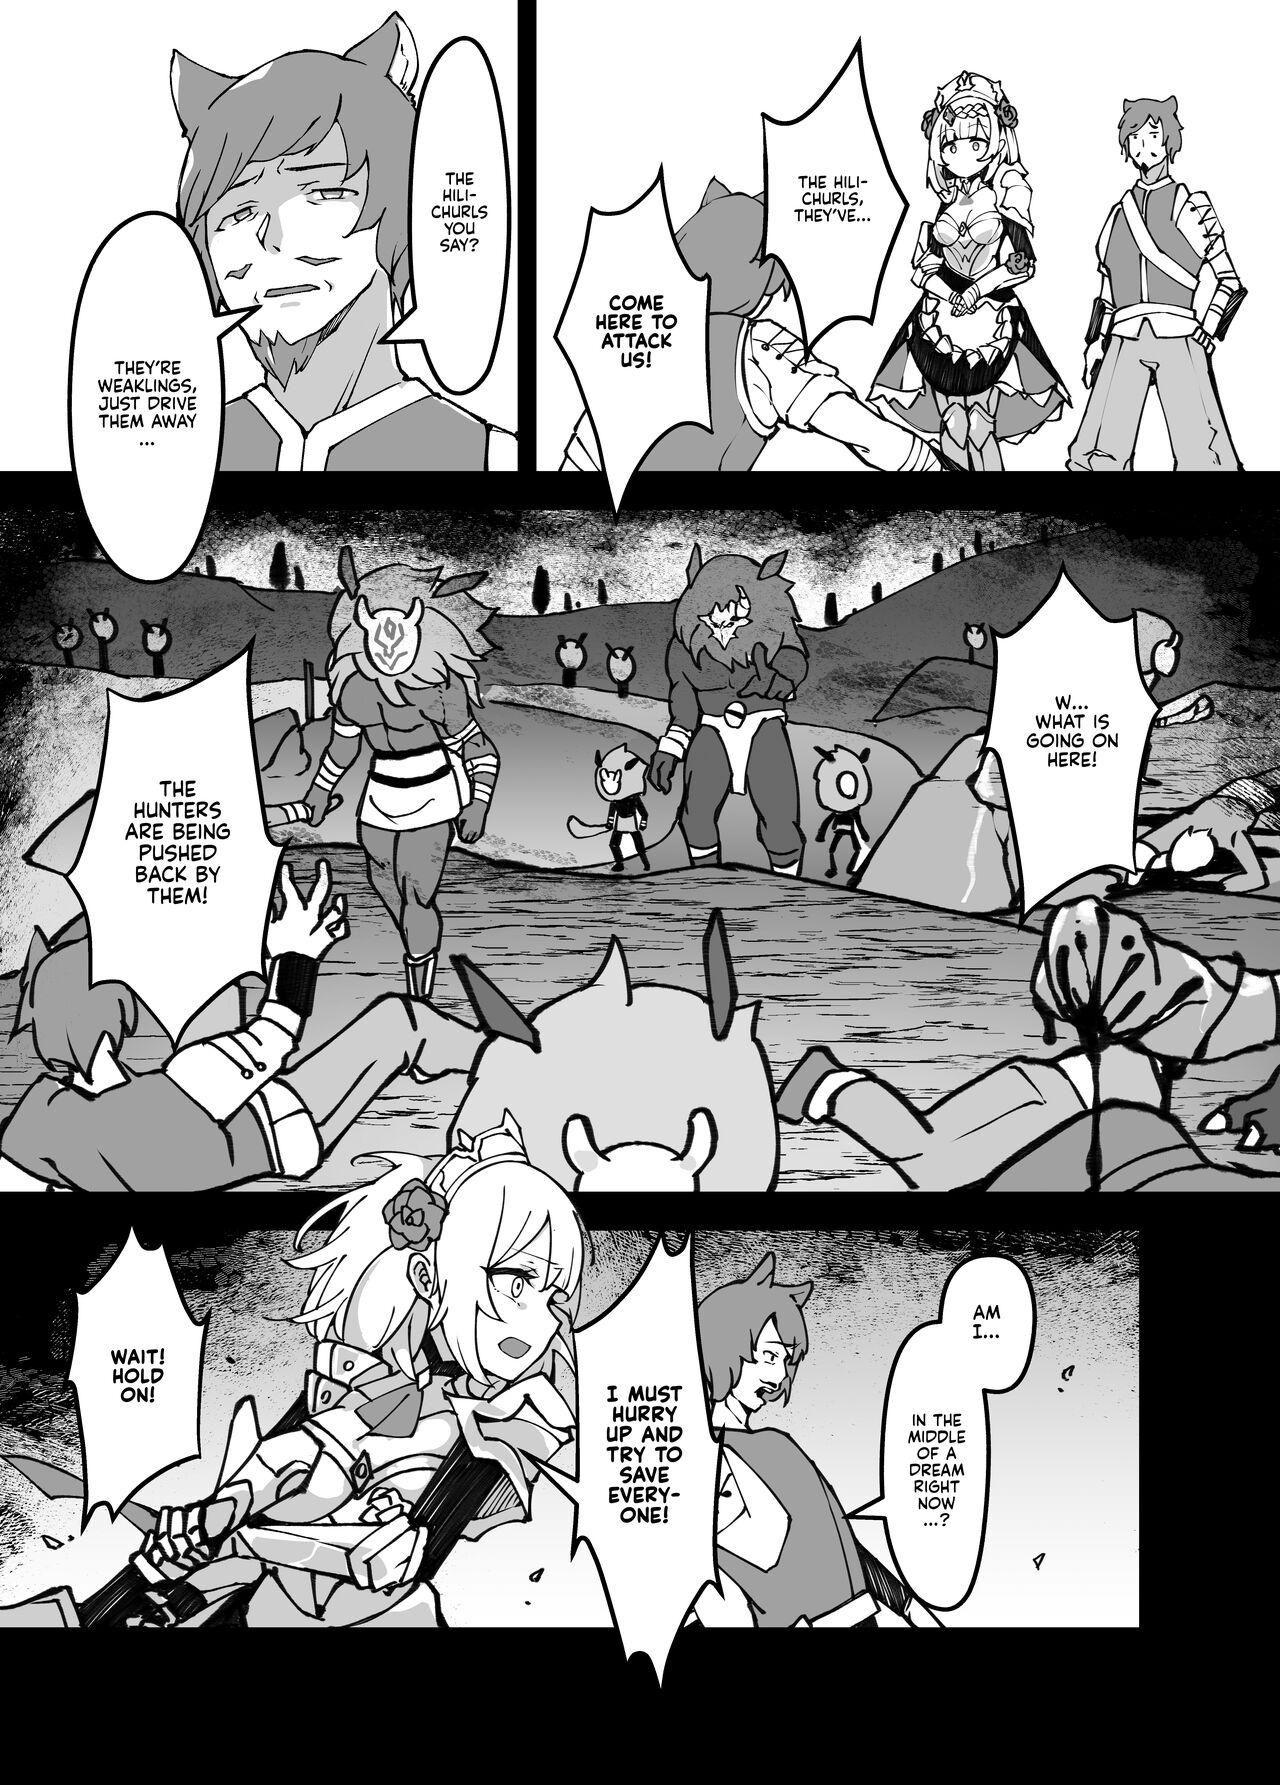 Free Hardcore Porn [Karouke (Karou)] The Attack of the Hilichurls II ~The Invasion's Prelude~ Noelle,Chivalric Blossom that withered~ (Genshin Impact) [English] [Kyuume] [Digital] - Genshin impact Ejaculation - Page 10